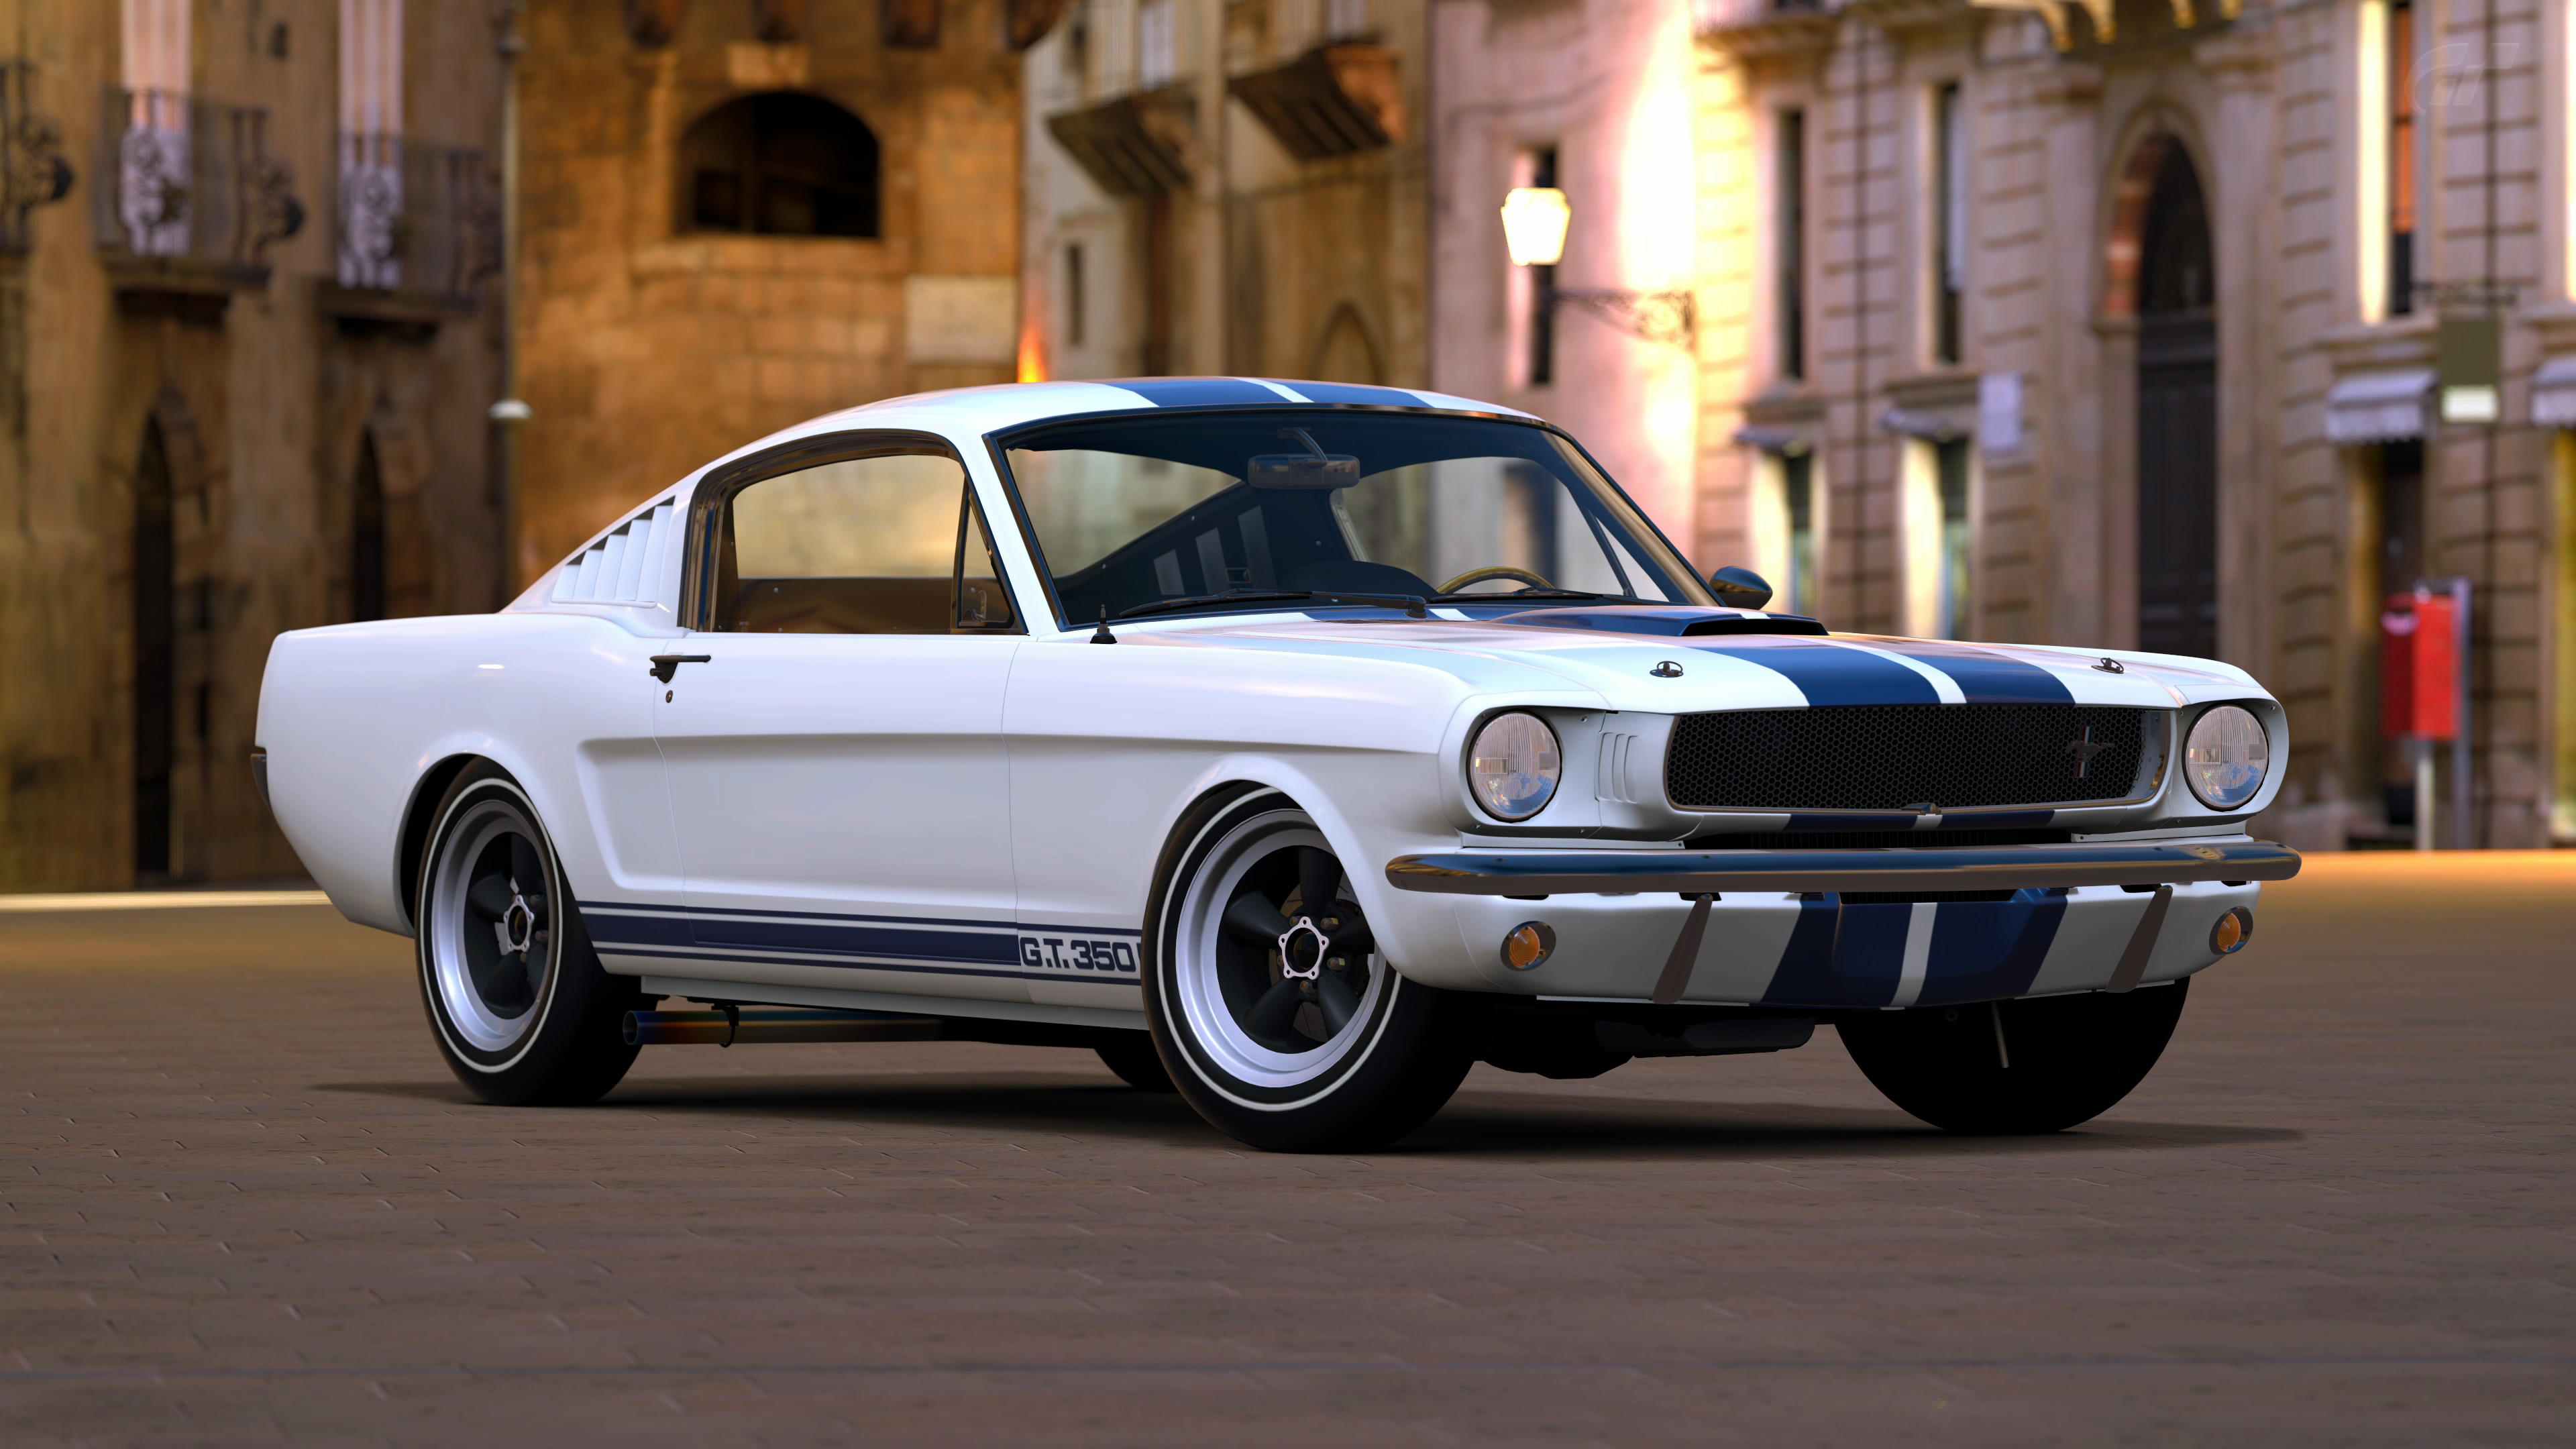 3840x2160 20+ Shelby Mustang GT350 HD Wallpapers and Backgrounds